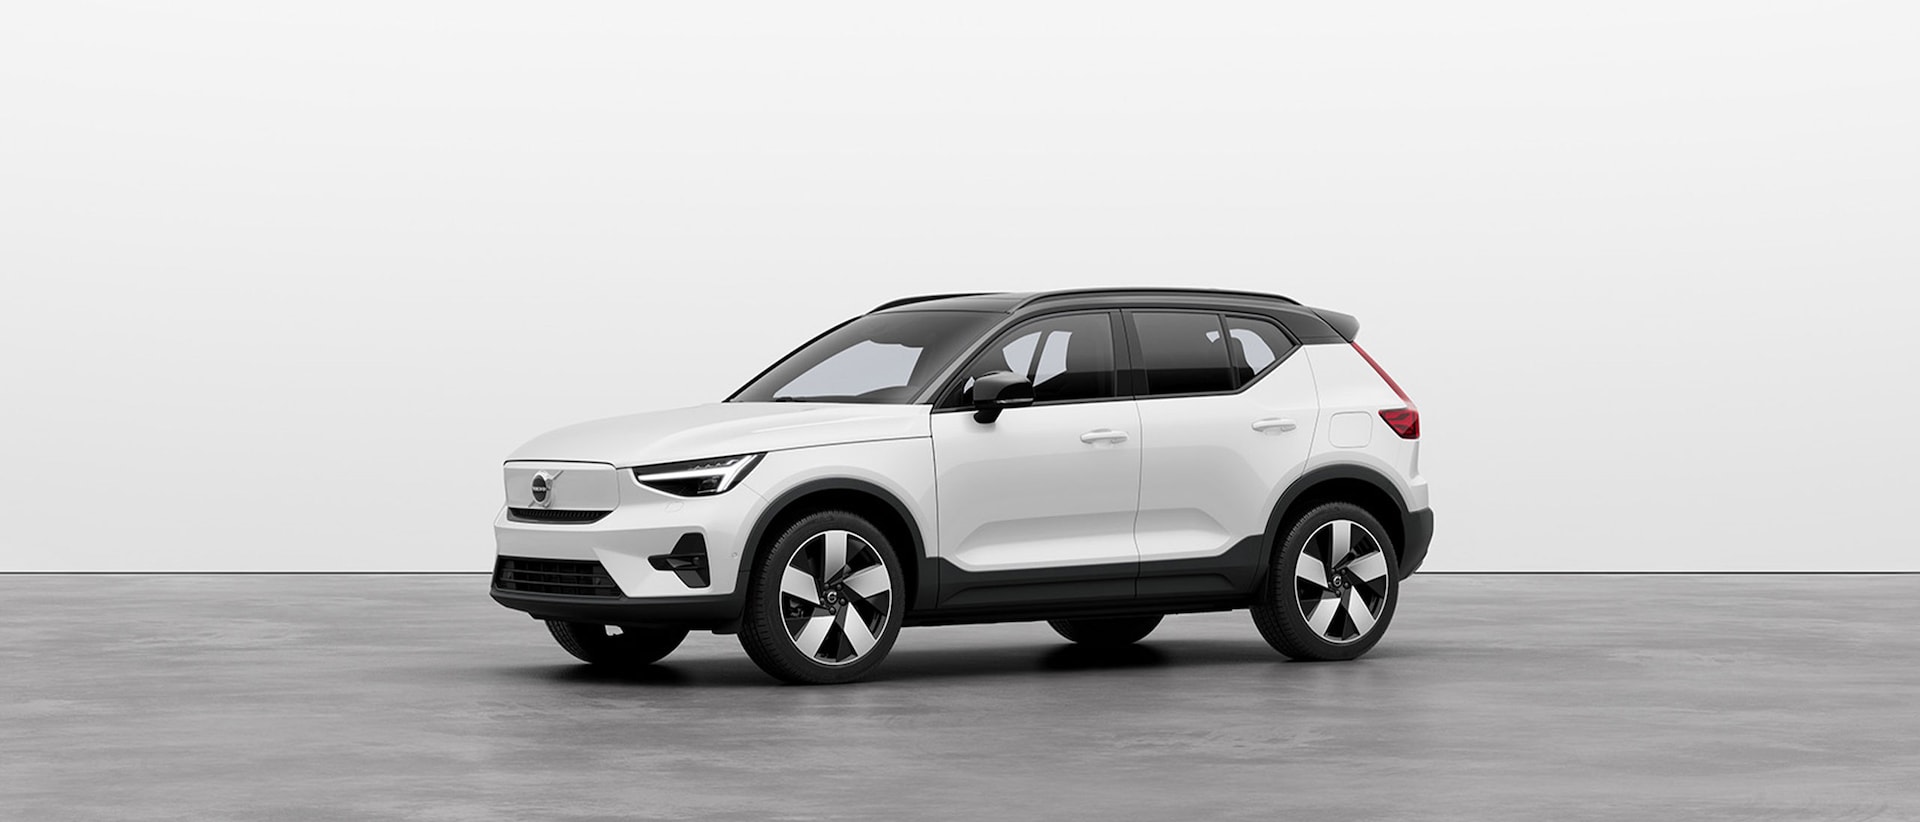 XC40 Recharge specifications Image